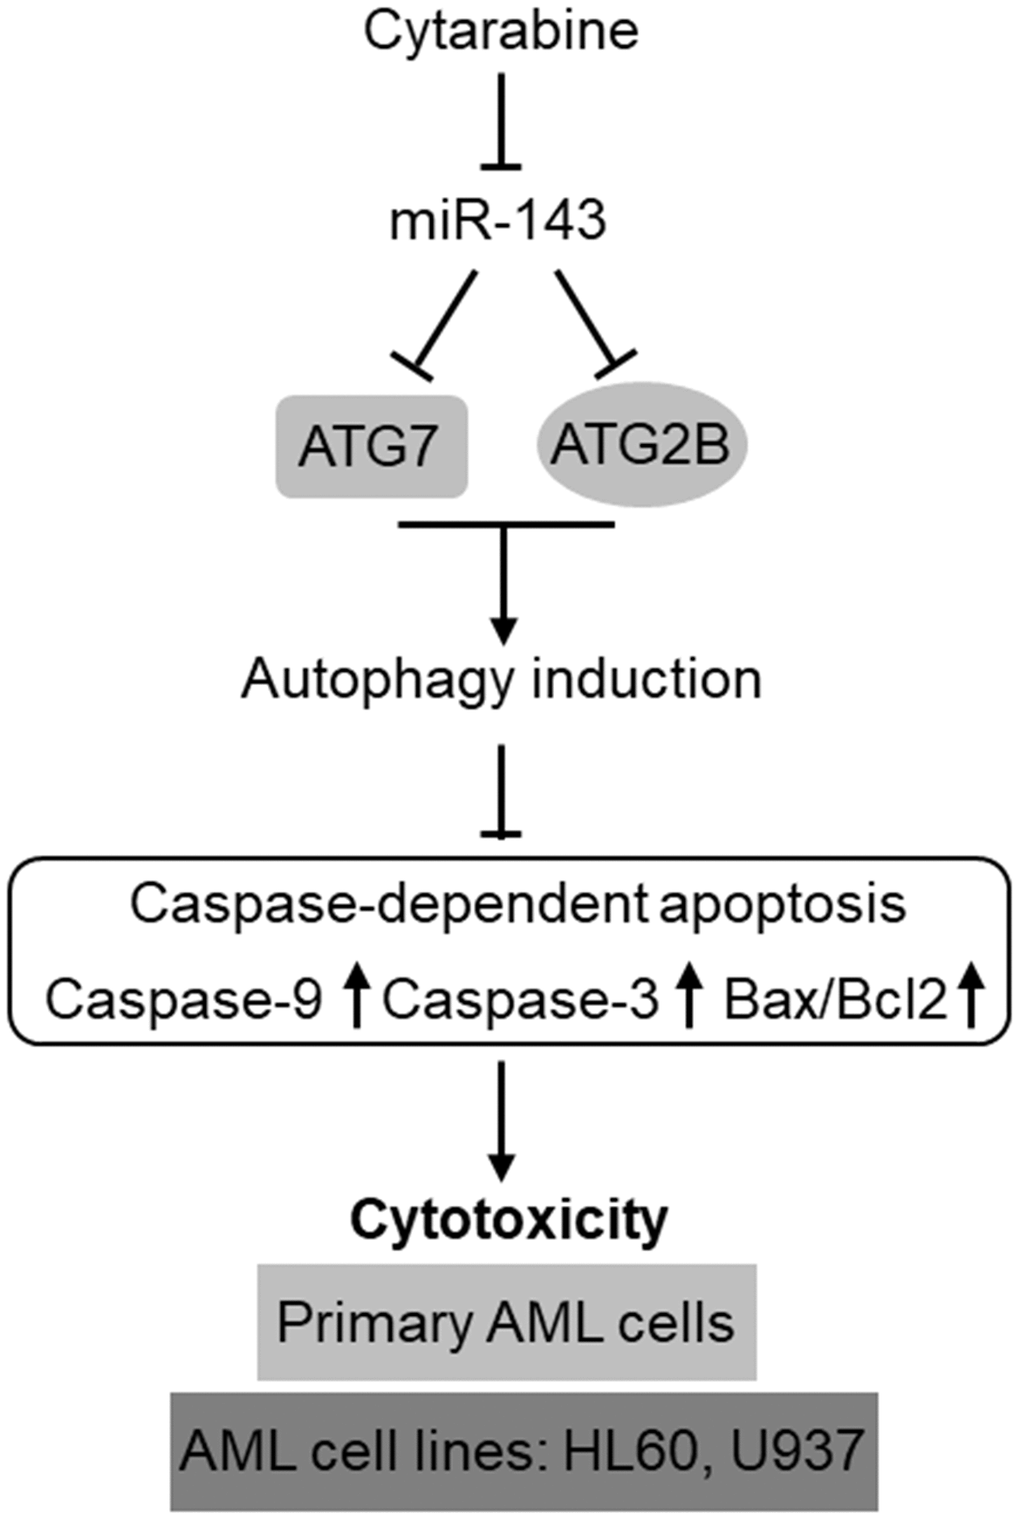 Schematic description of the role and mechanism by which miR-143 influences cytarabine activity against AML. MiR-143 functions to inhibit autophagy induction via targeting ATG7 and ATG2B, whereby erasing the inhibitory role of autophagy in cytarabine-induced caspase-dependent apoptosis and cytotoxicity in AML cells, including primary AML cells and human AML cells lines, HL60 and U937. However, the expression of miR-143 in AML cells is downregulated by cytarabine treatment, thus compromising the cytarabine cytotoxicity against AML cells.